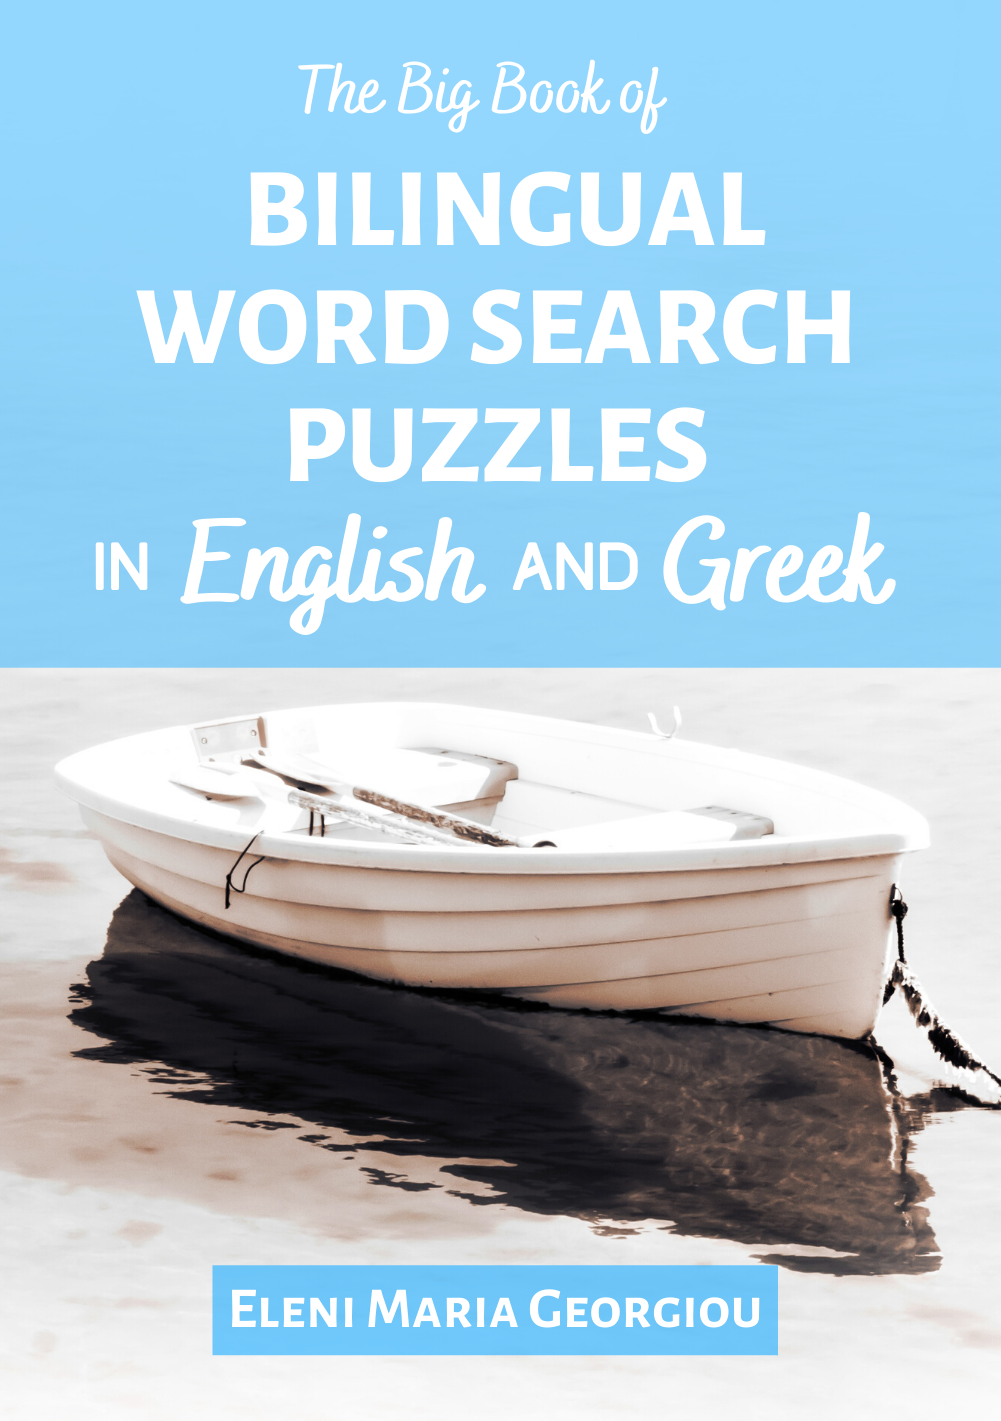 The Big Book of Bilingual Word Search Puzzles in English and Greek